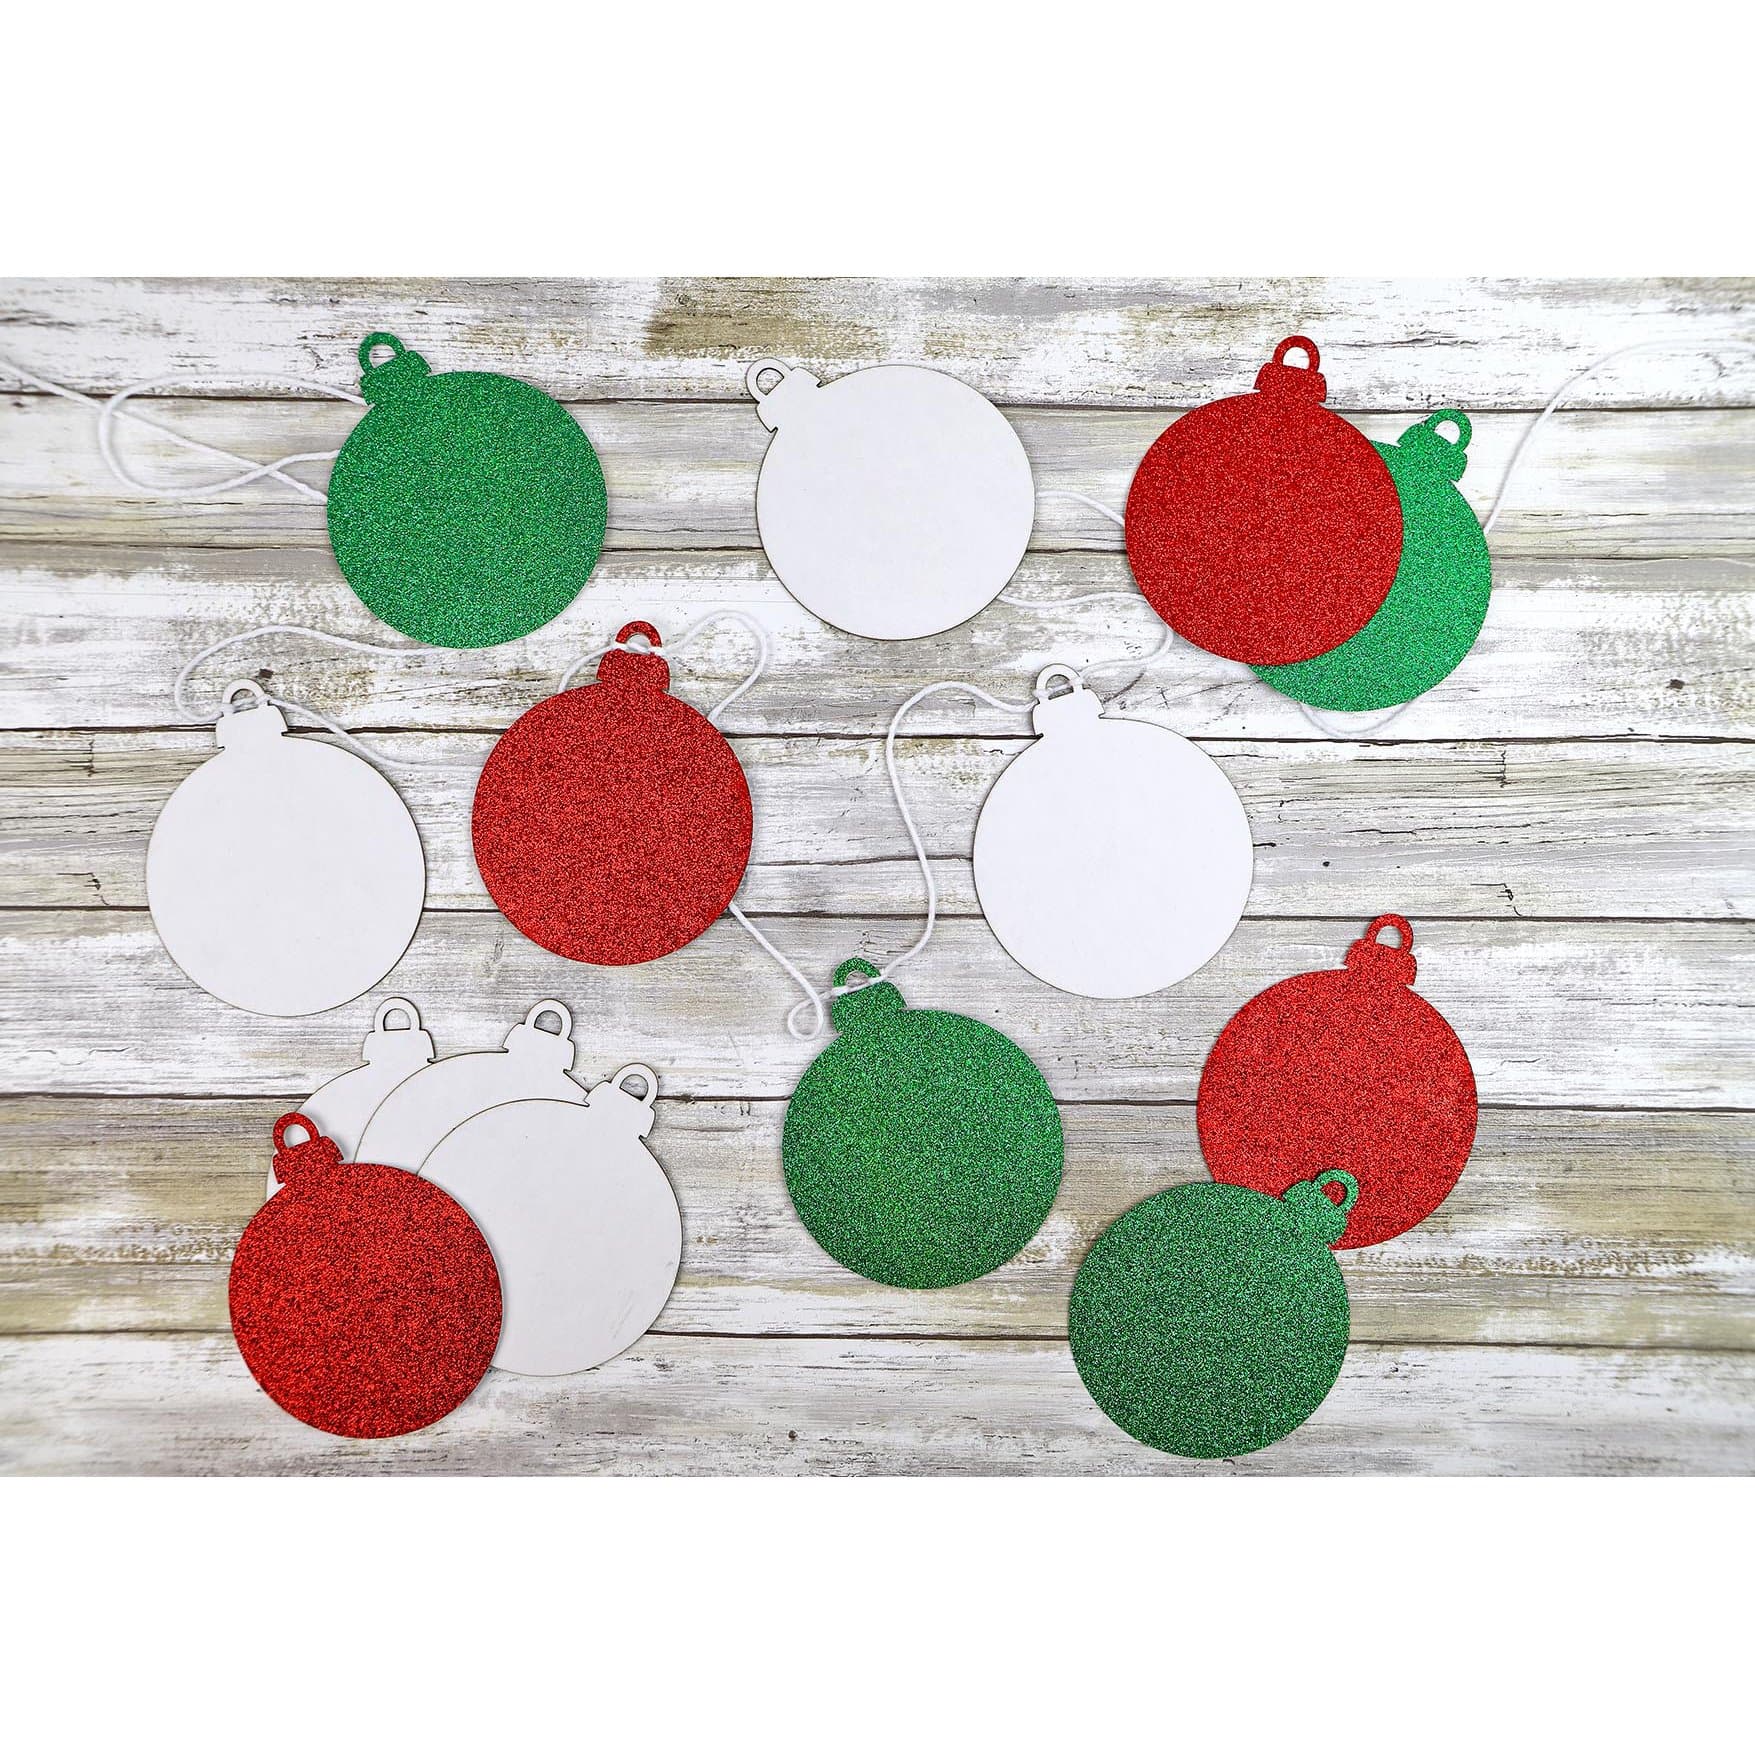 PA Paper&#x2122; Accents Ornaments Chip &#x26; Glitter Pennant Set